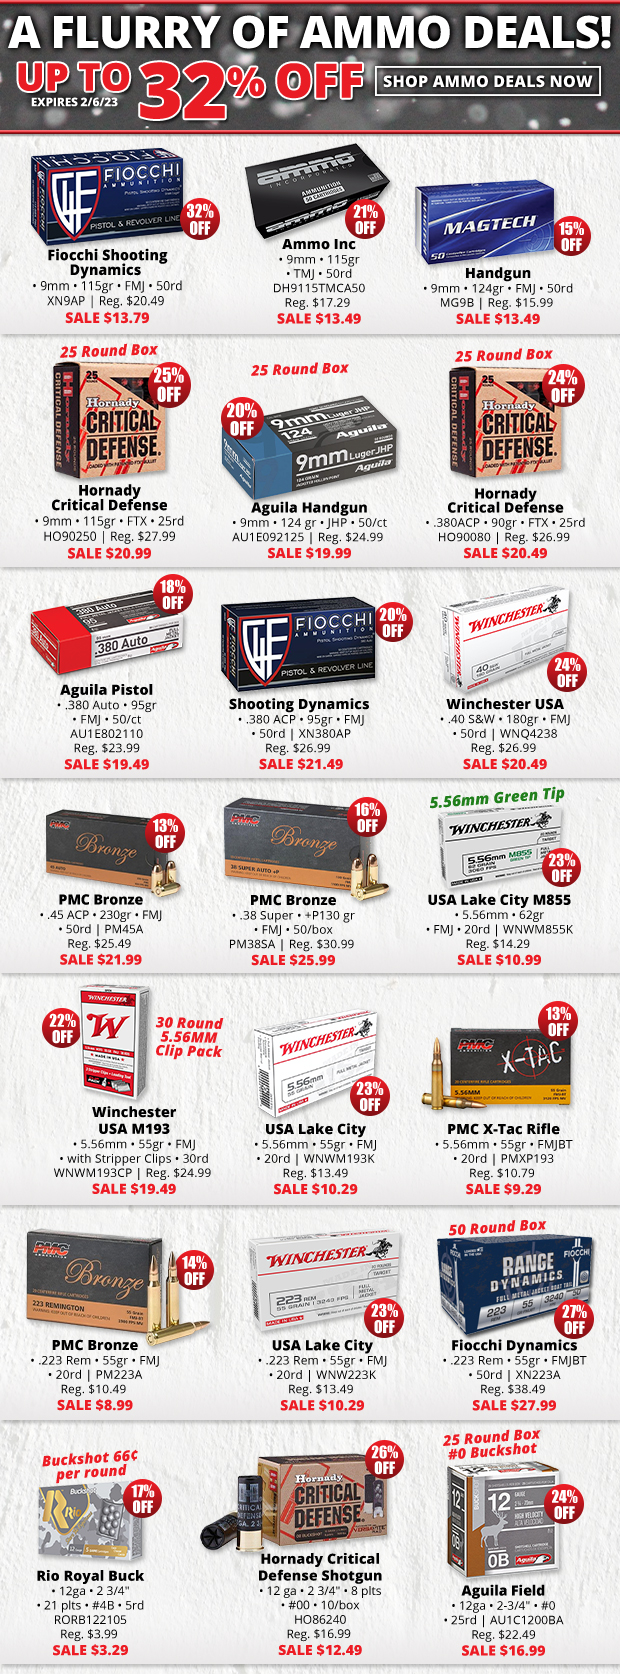 Ammo Deals Up to 32% Off